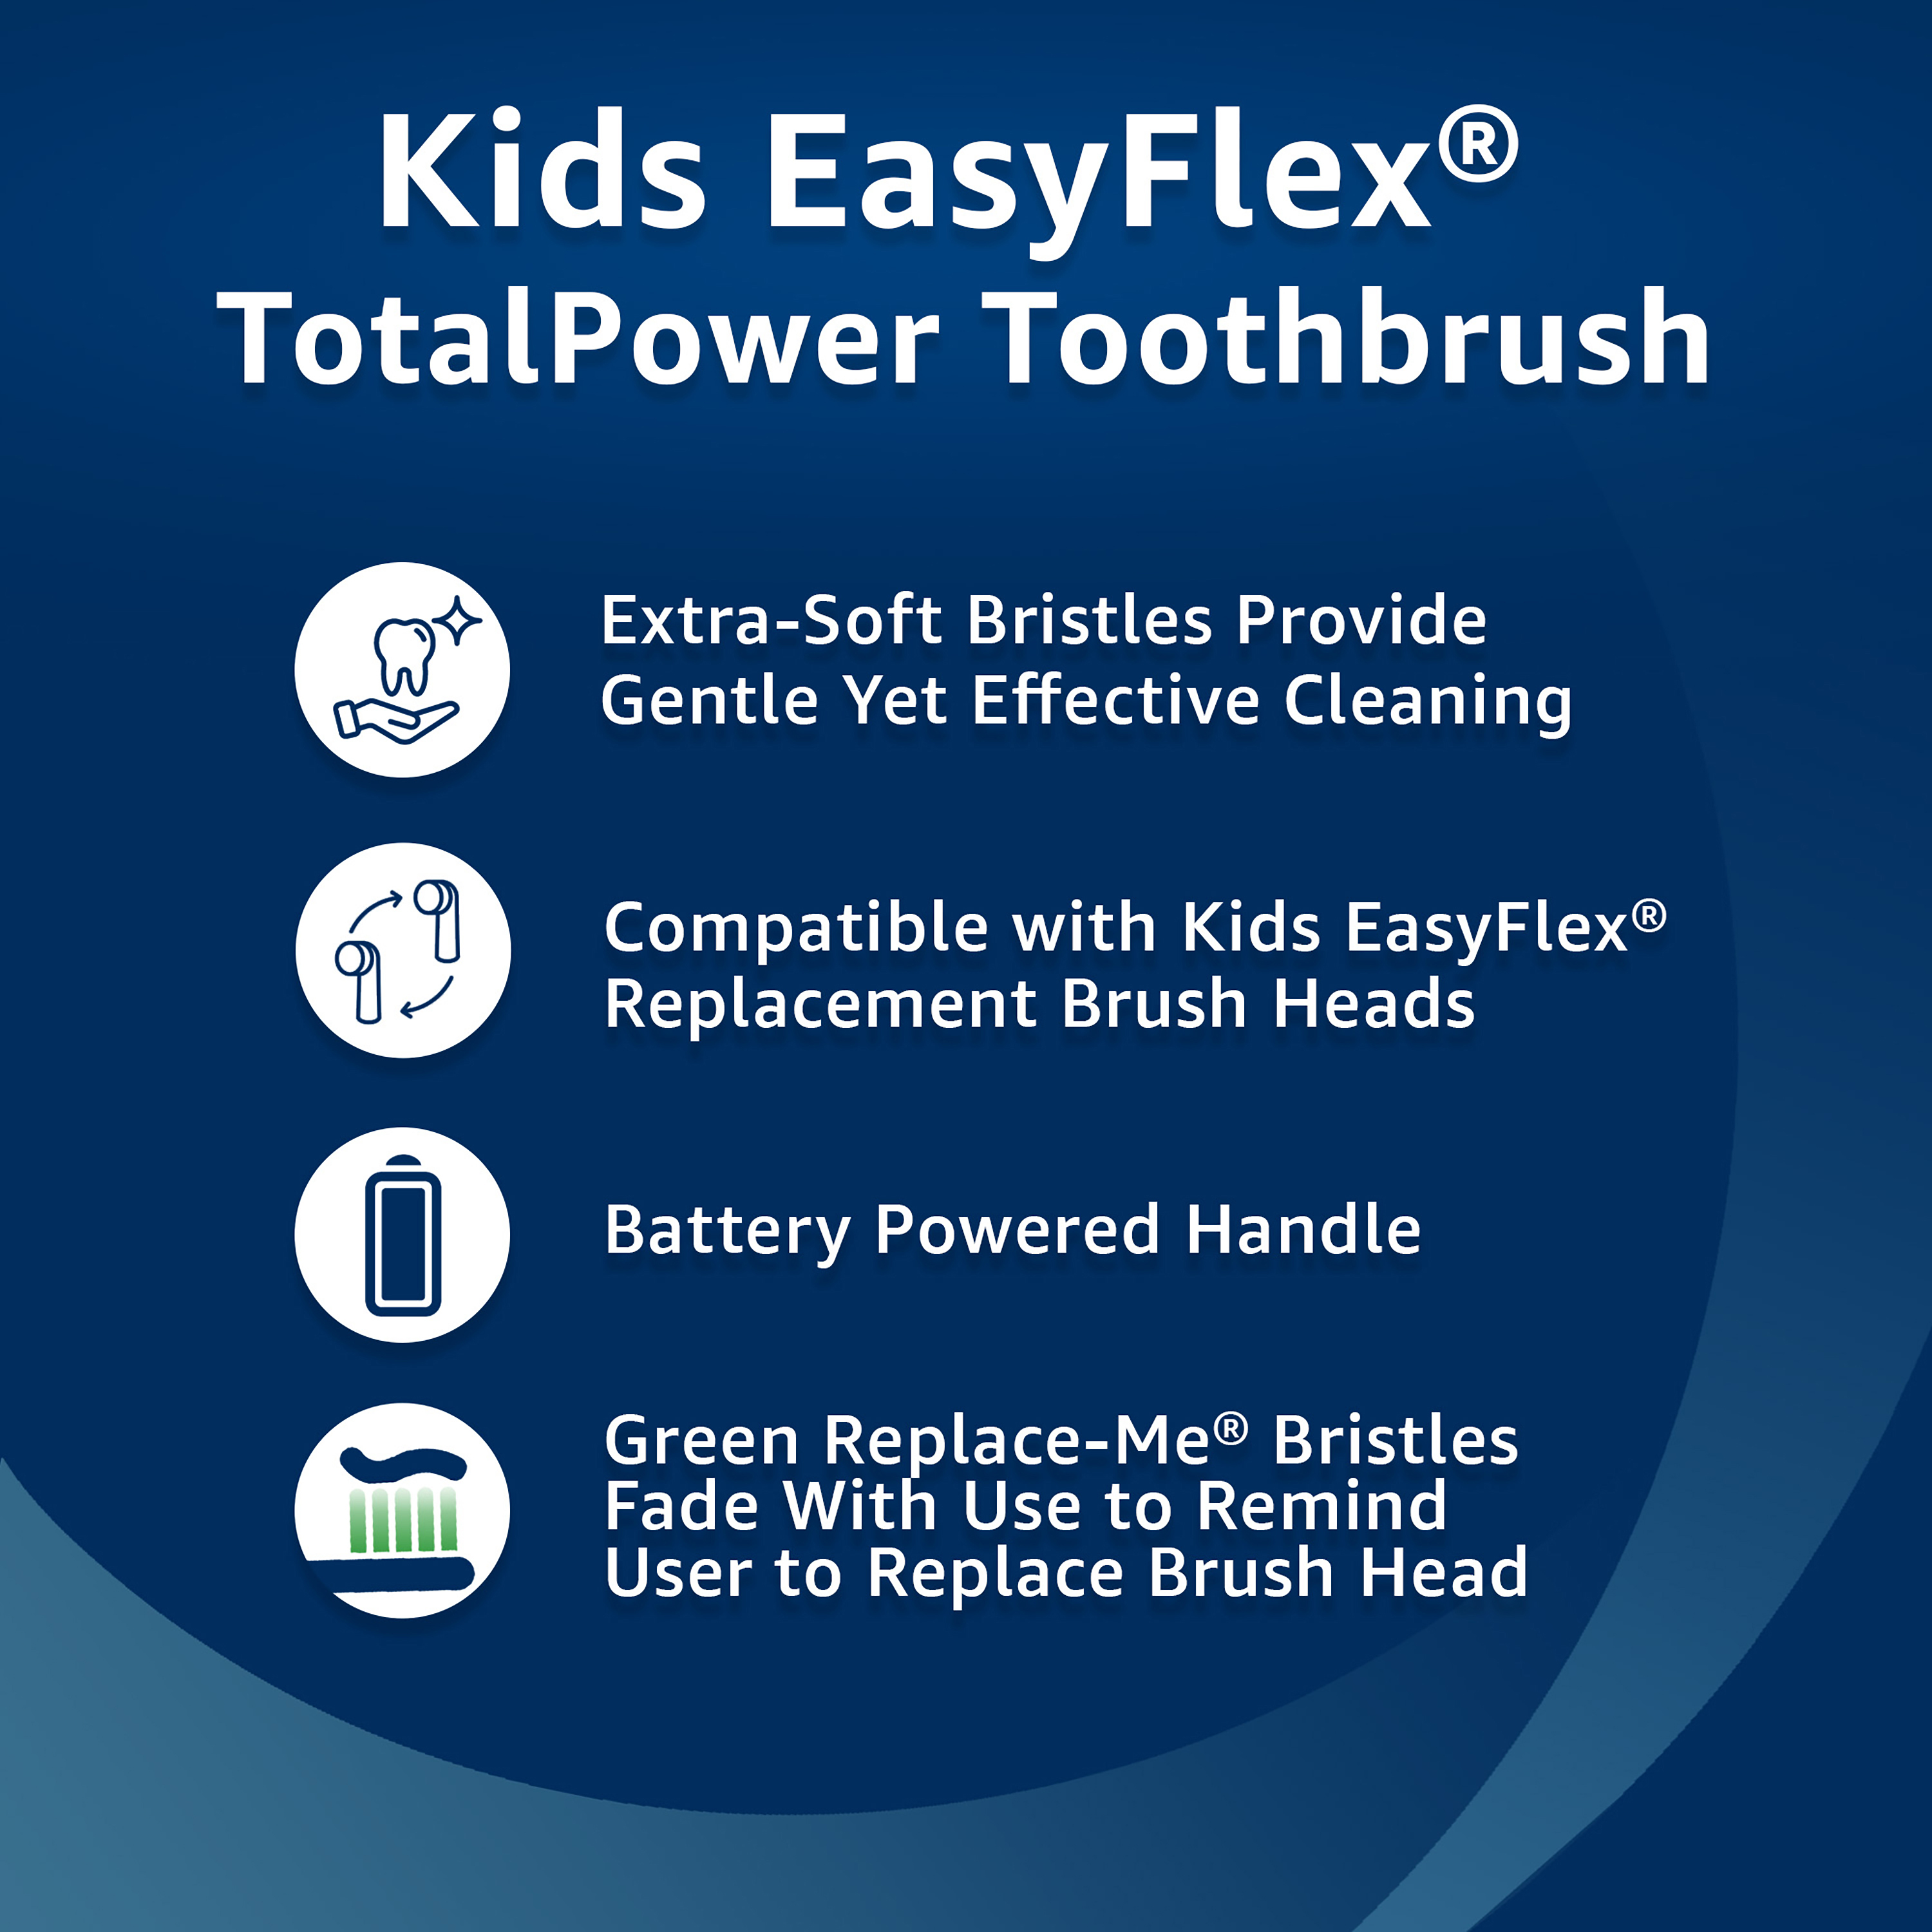 Equate Kids EasyFlex TotalPower Toothbrush with Replacement Brush Head, Battery Powered - image 4 of 12